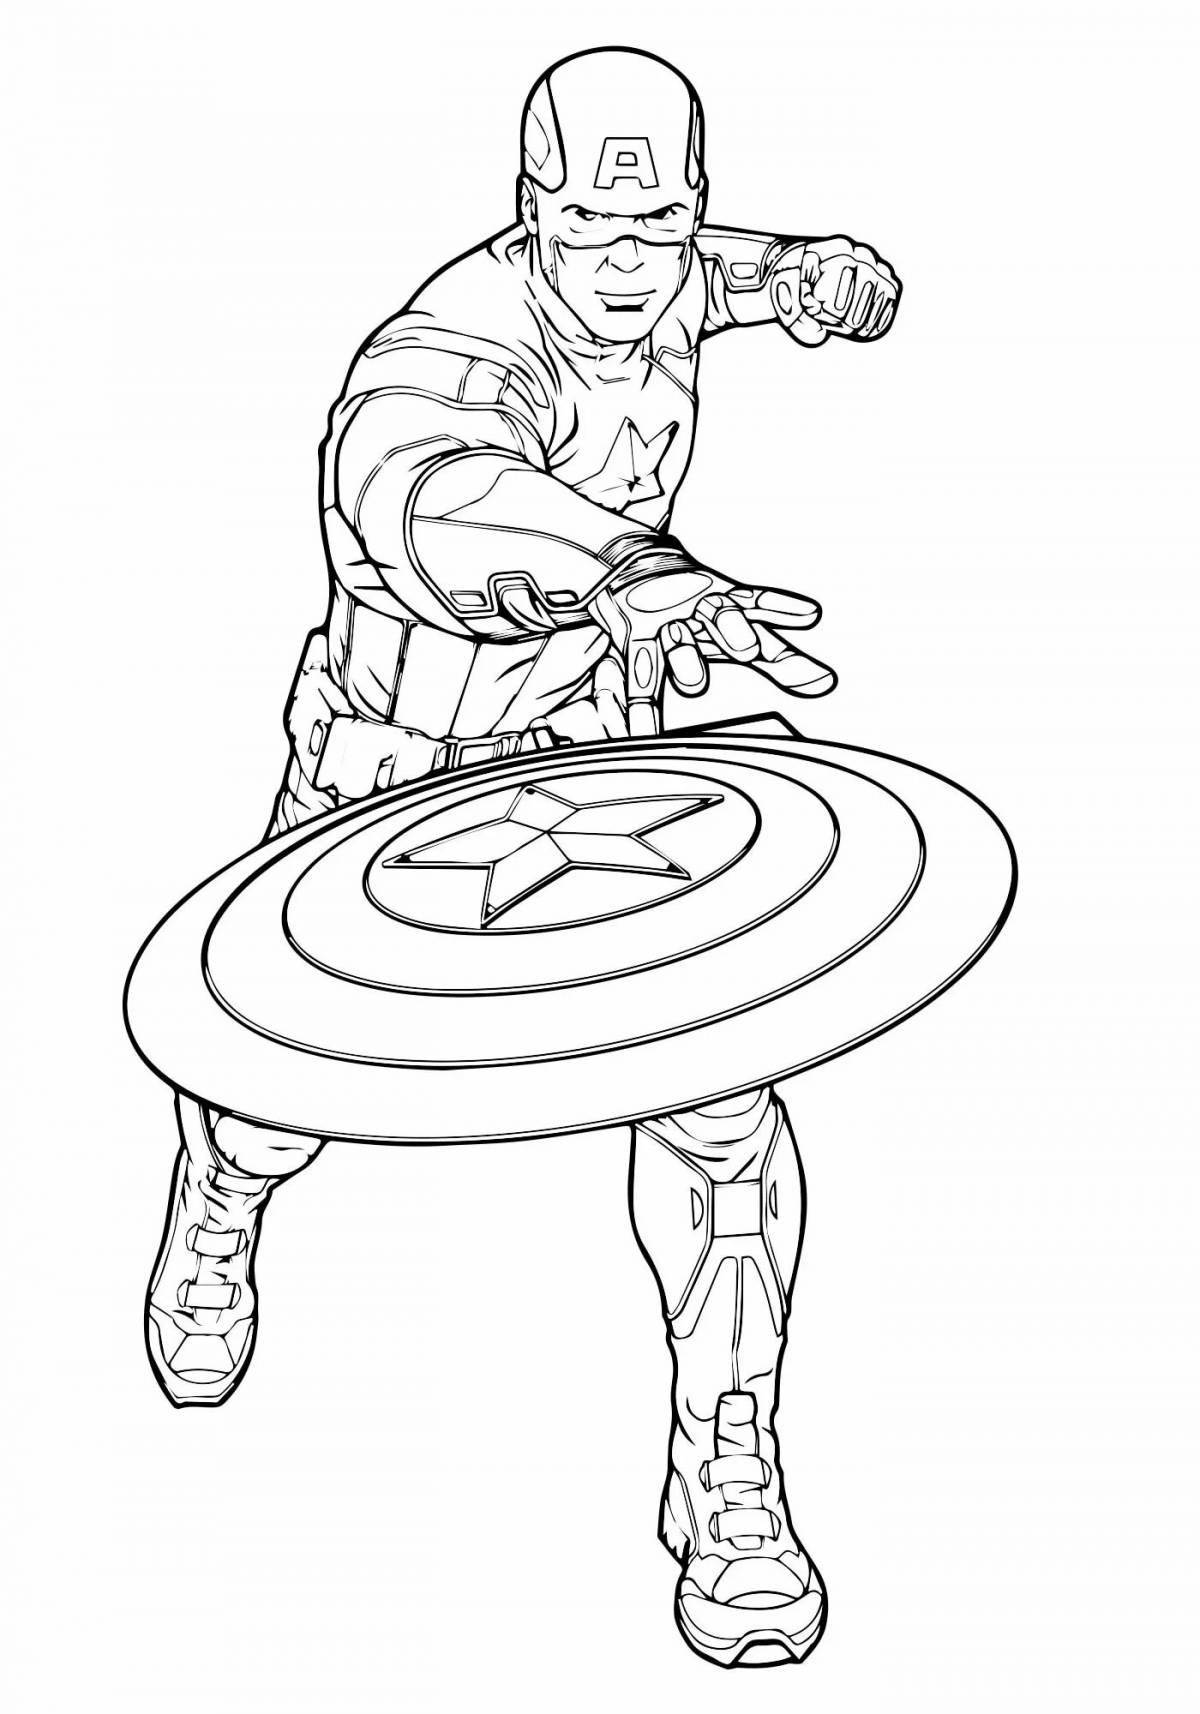 Charming captain america coloring page for boys